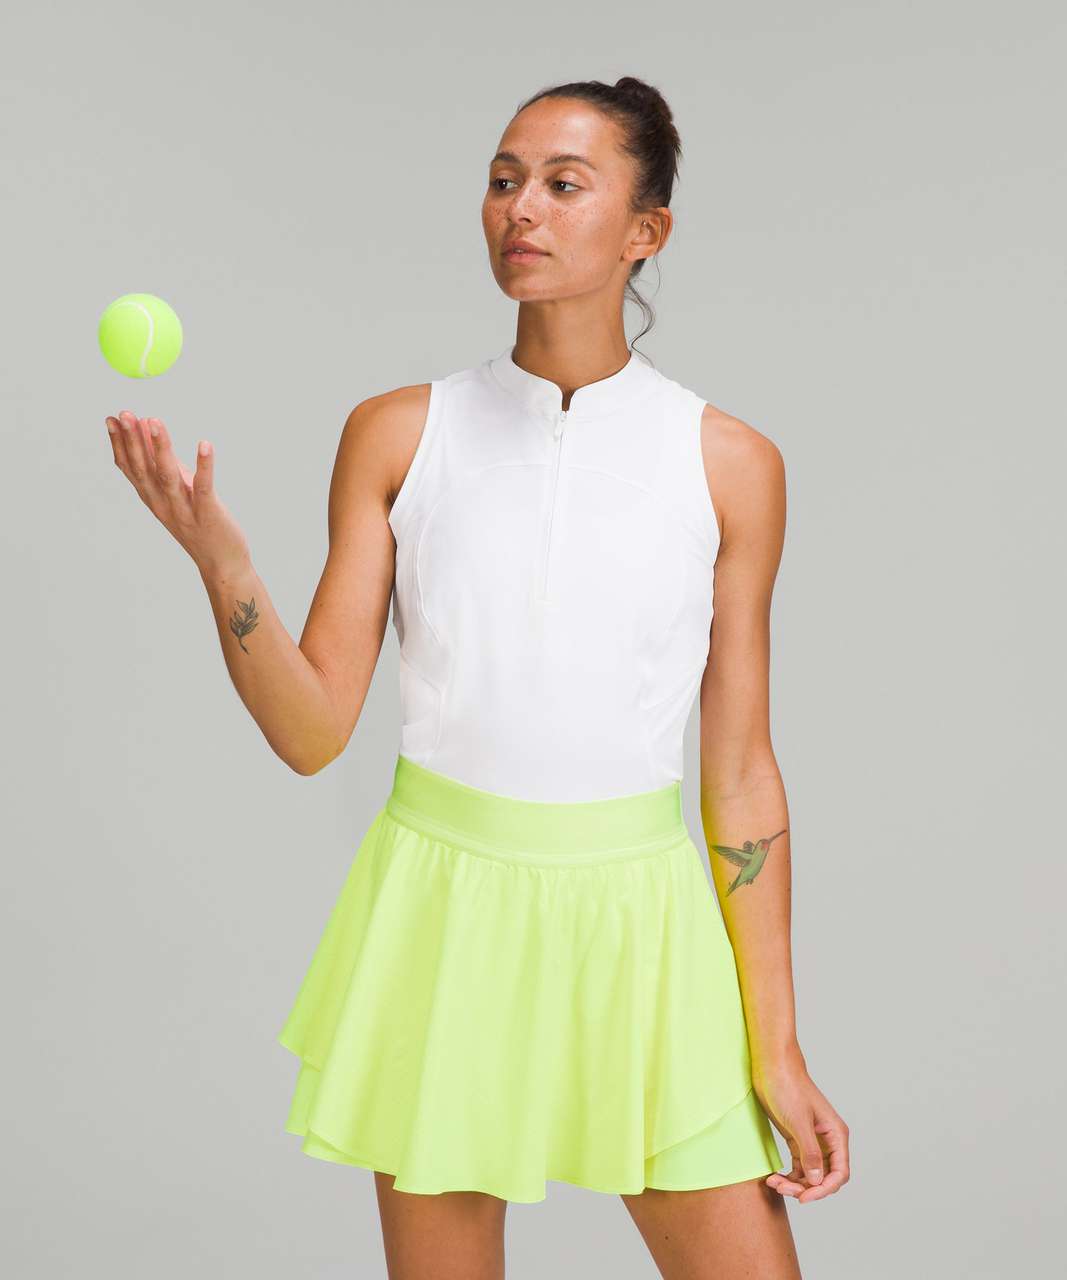 Lululemon Court Rival Perforated High-Rise Skirt *Long - Highlight Yellow